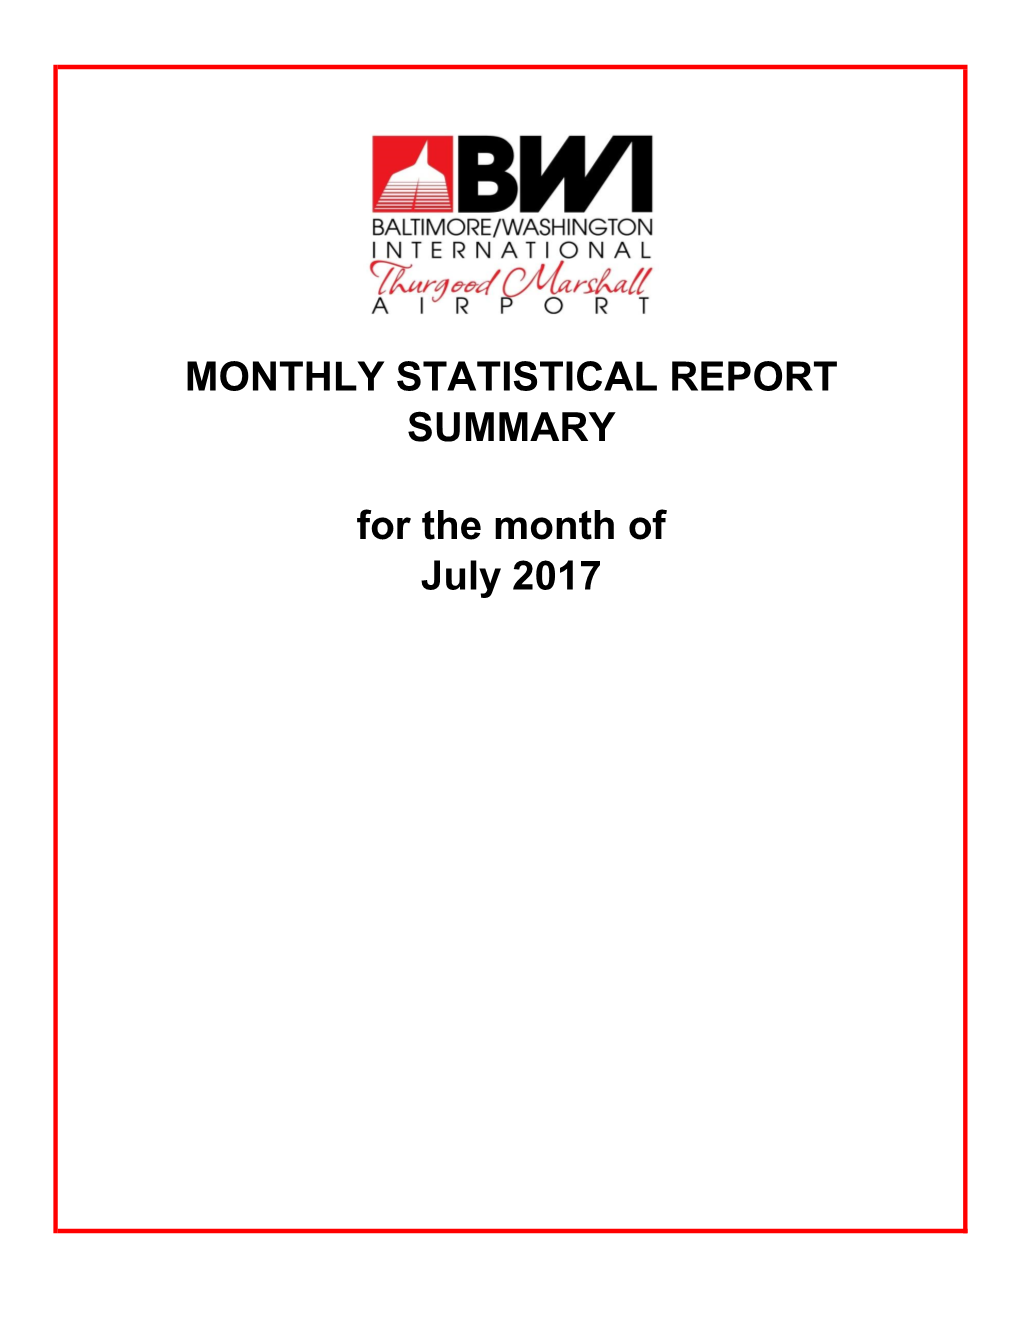 MONTHLY STATISTICAL REPORT for the Month of July 2017 SUMMARY